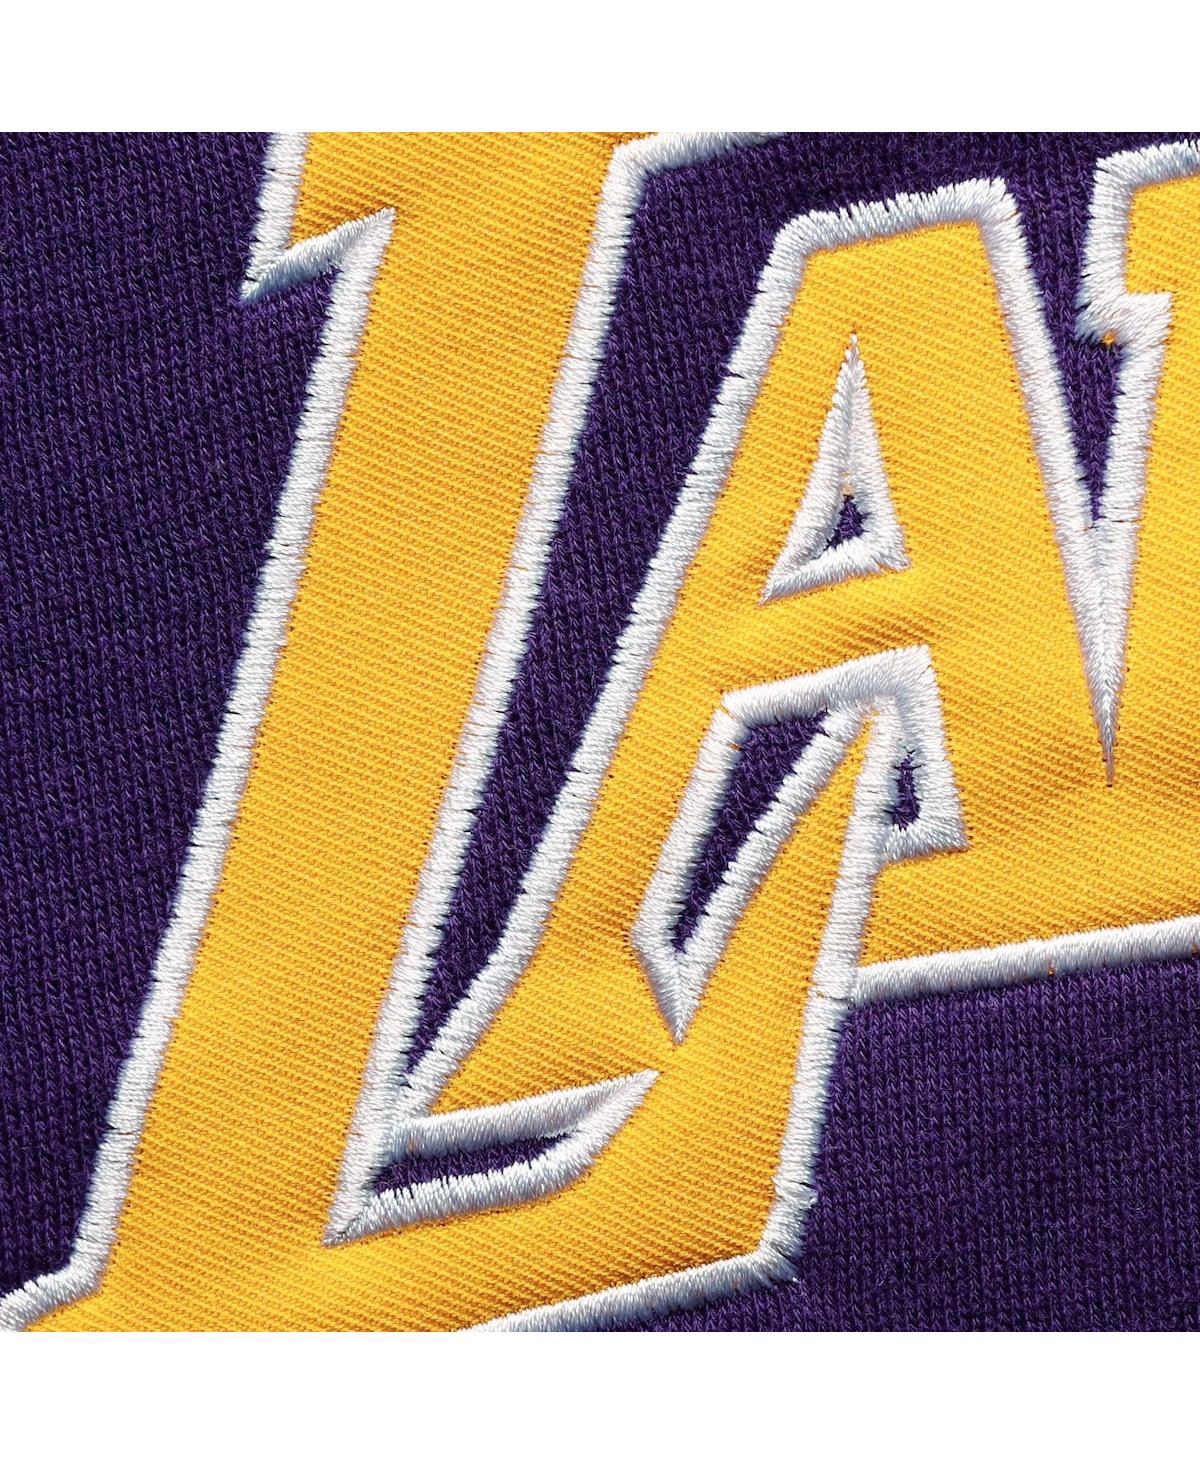 Shop Fanatics Men's  Purple And Gold Los Angeles Lakers Big And Tall Double Contrast Pullover Hoodie In Purple,gold